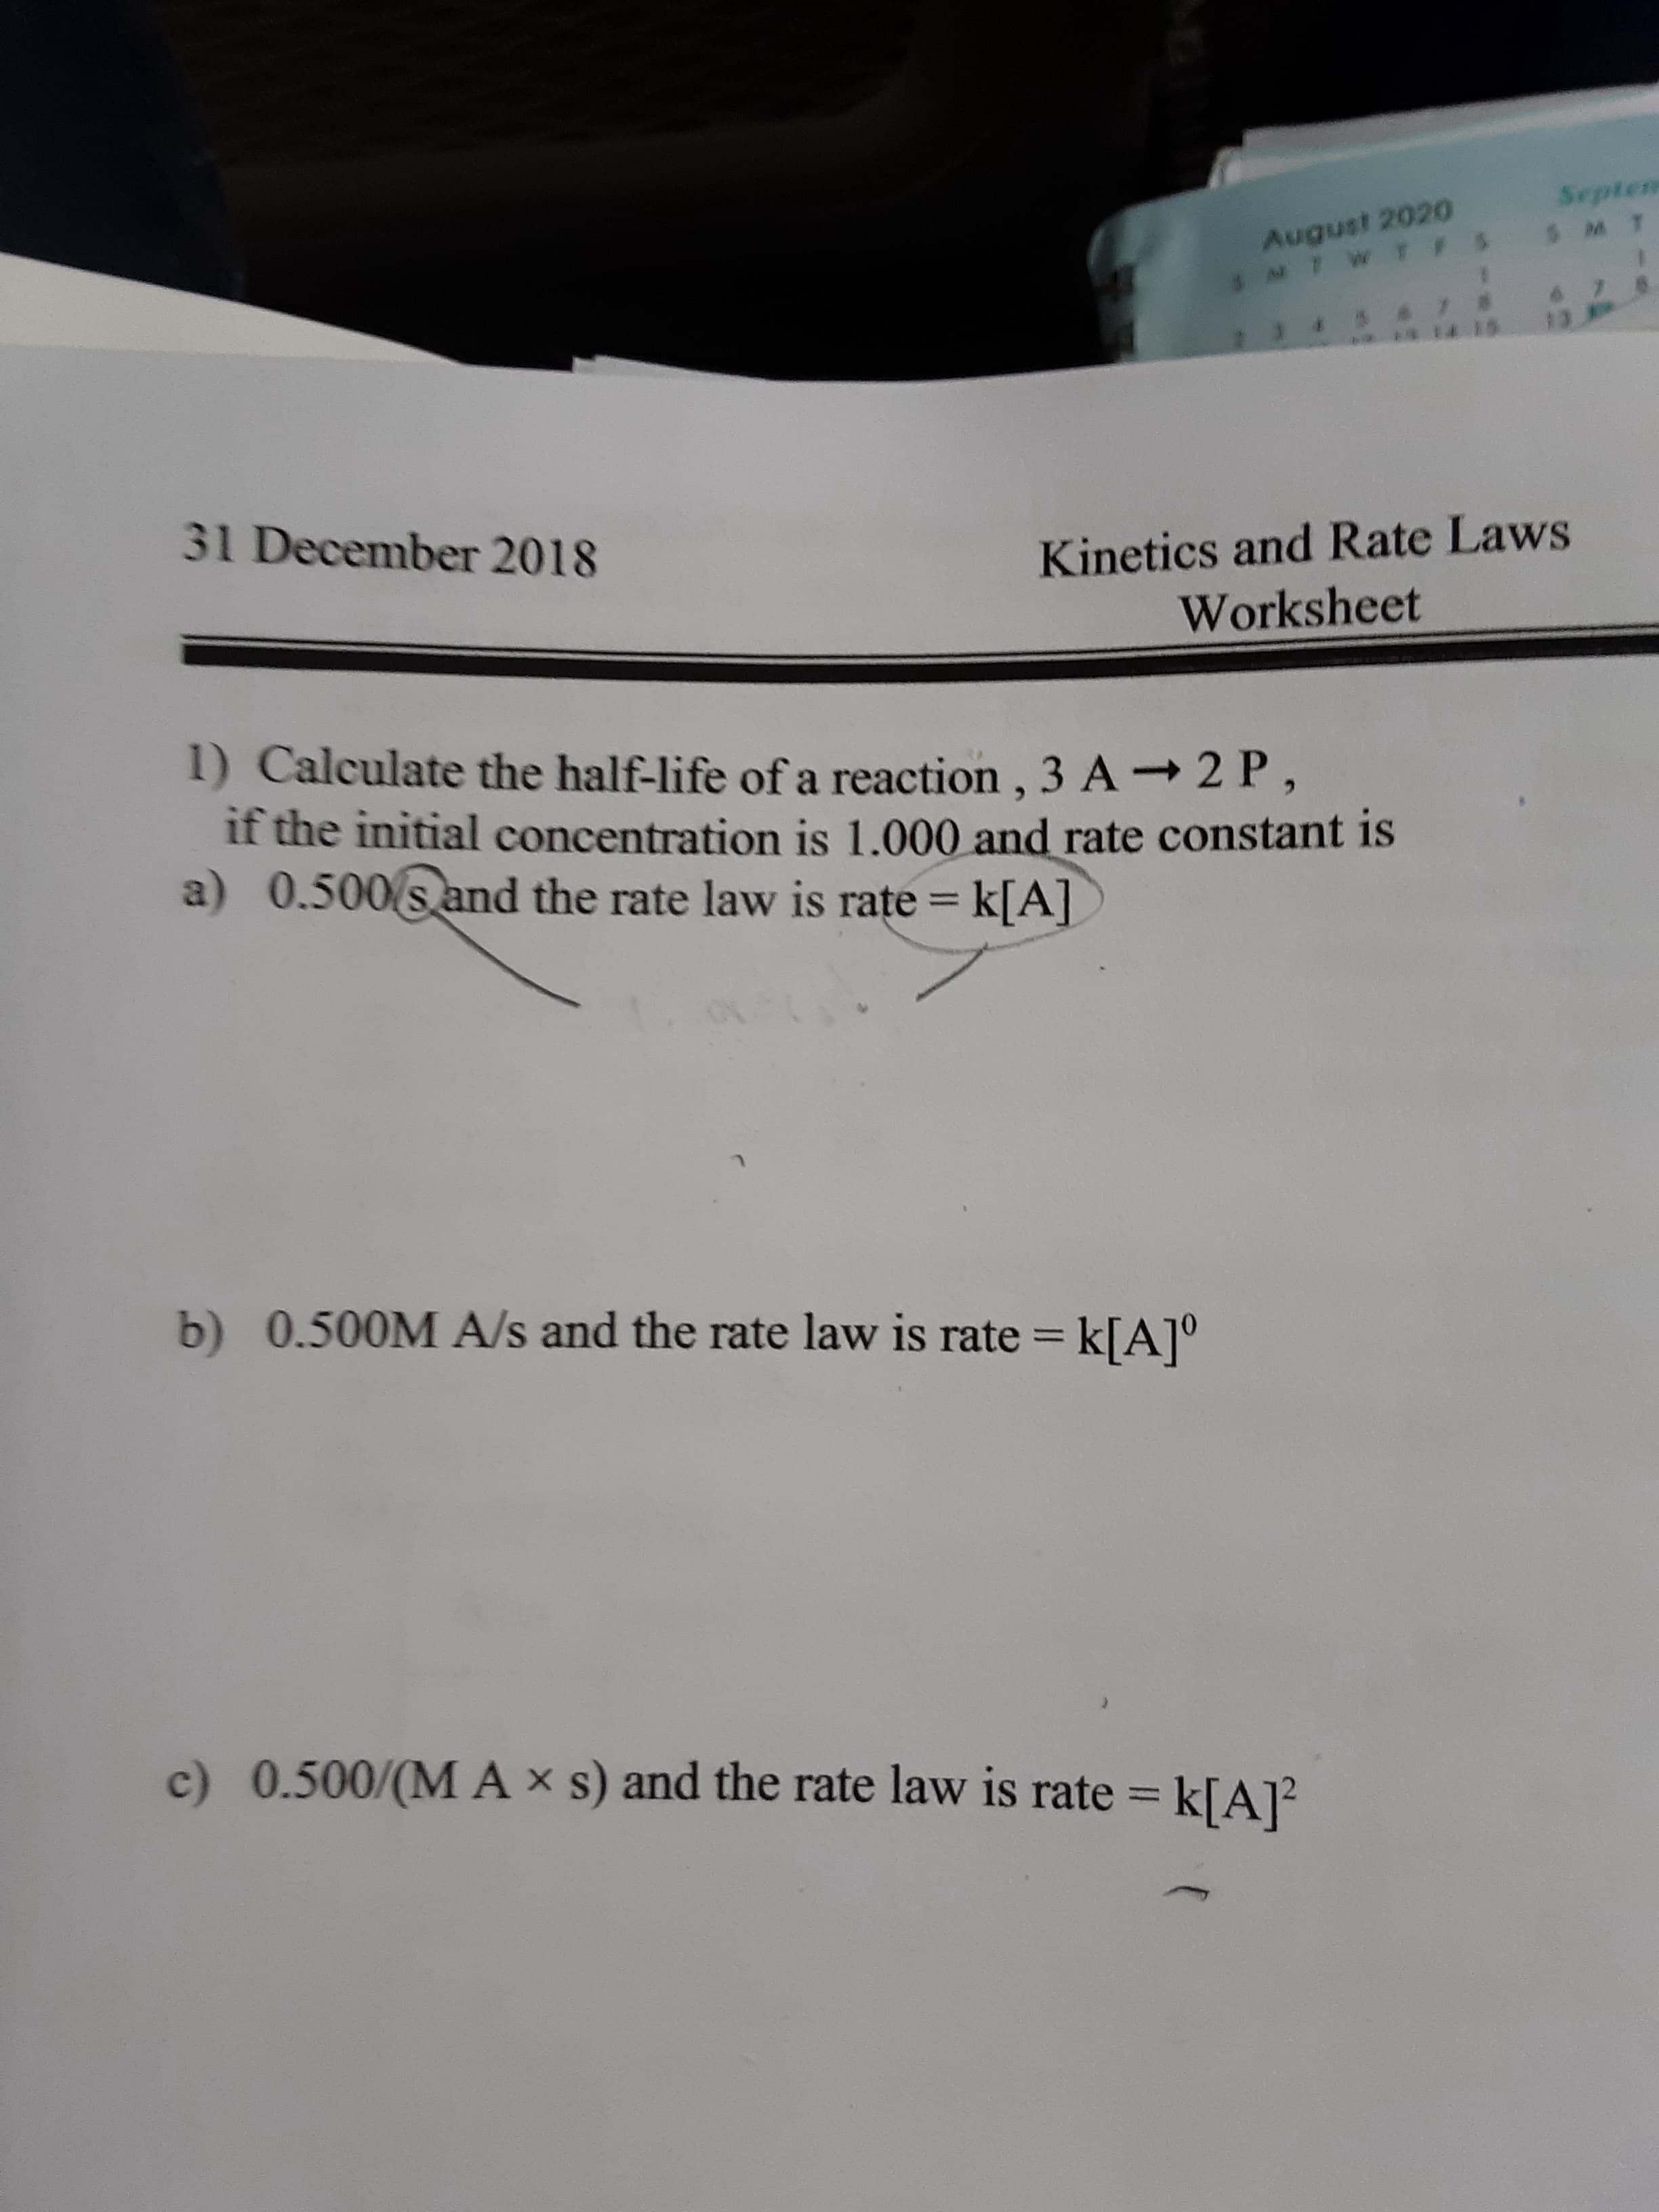 1) Calculate the half-life of a reaction , 3 A→2 P,
if the initial concentration is 1.000 and rate constant is
a) 0.500 s and the rate law is rate = k[A]
b) 0.500M A/s and the rate law is rate = k[A]°
%3D
c) 0.500/(M A × s) and the rate law is rate = k[A]?
%3D
